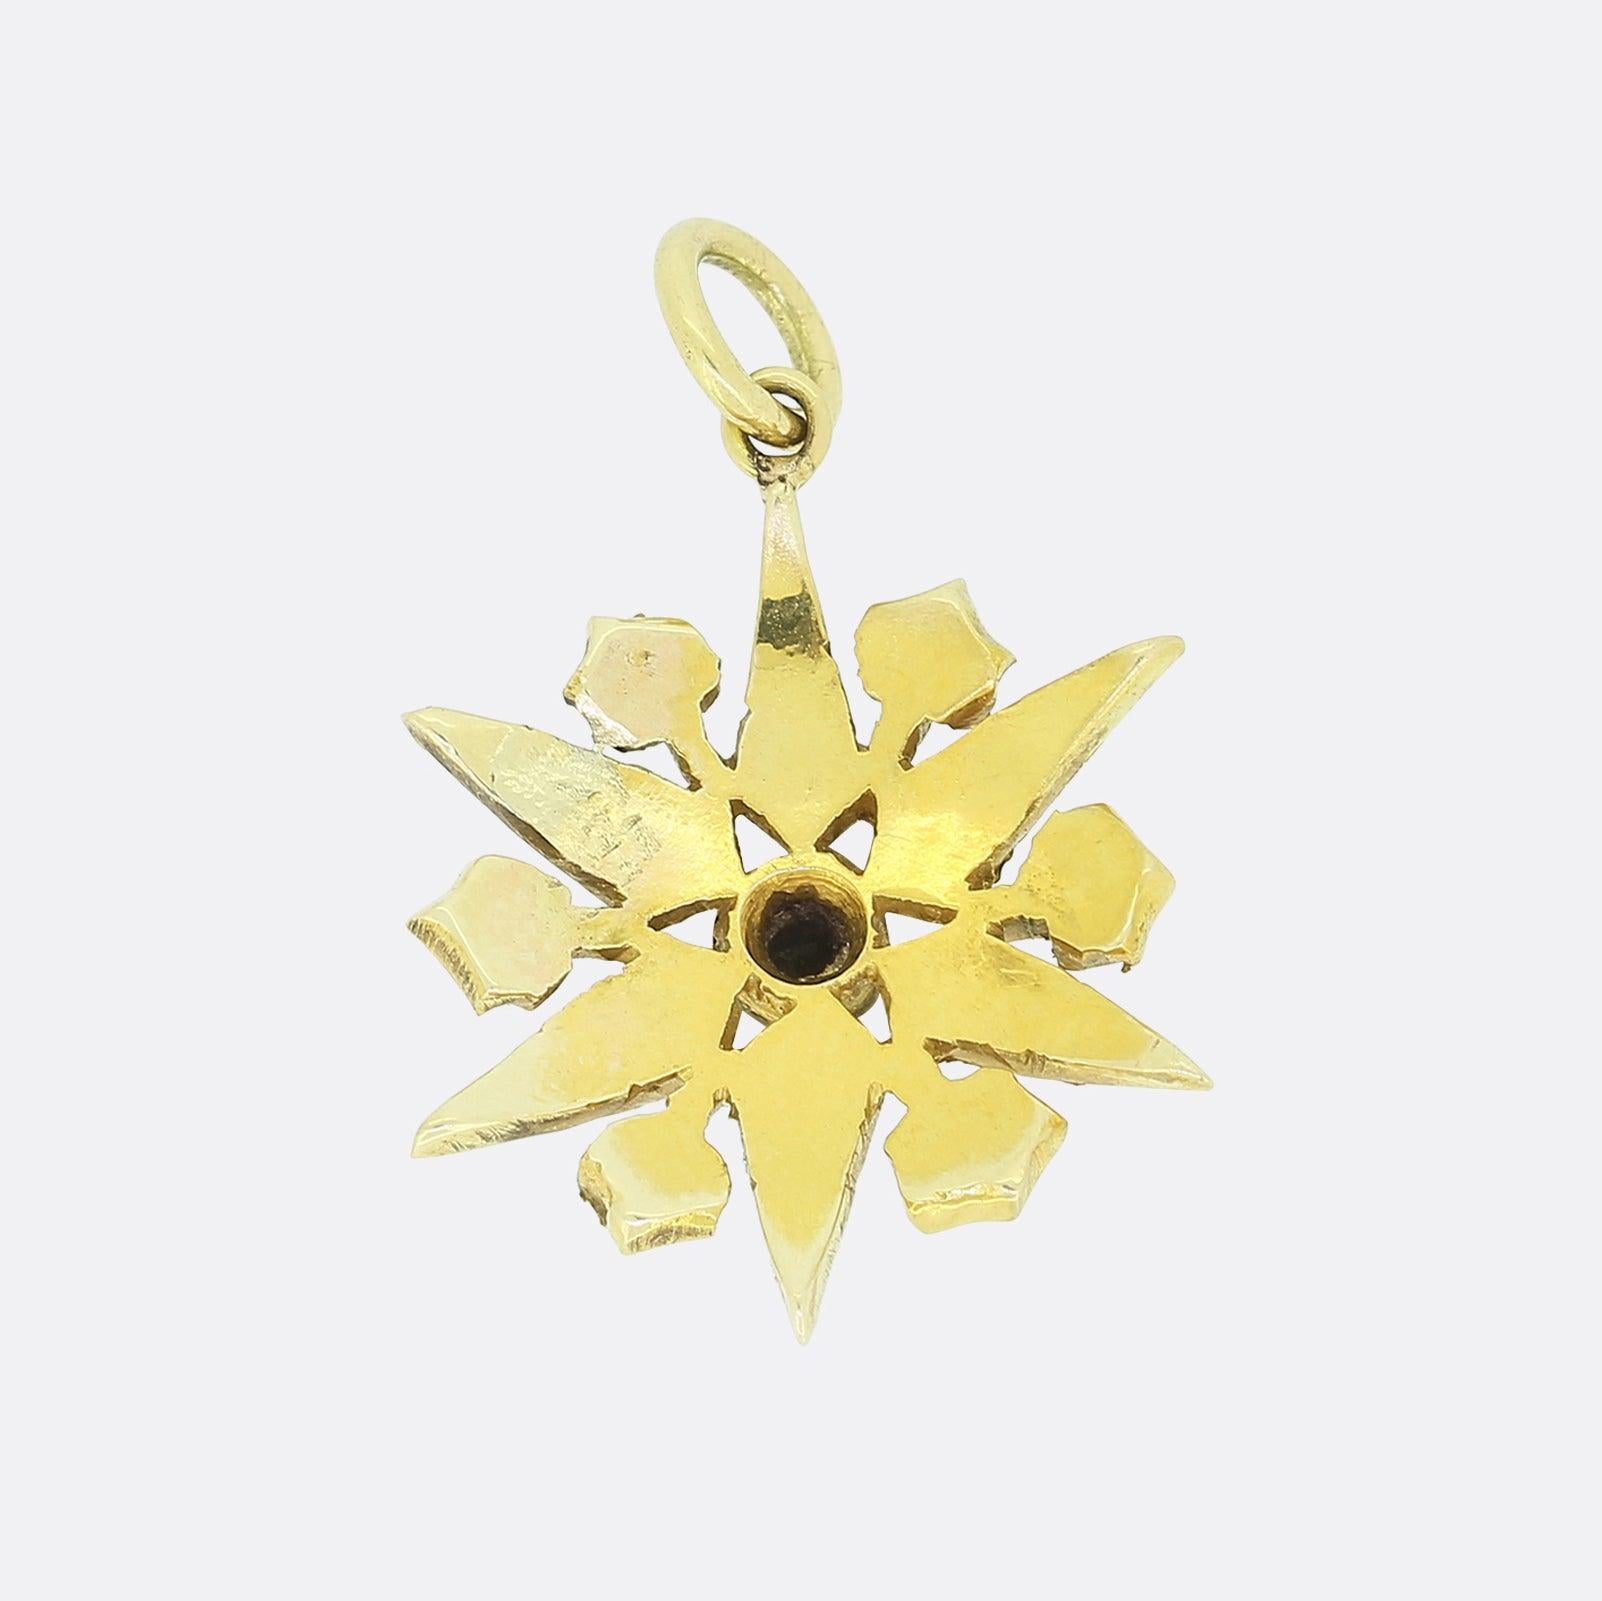 Here we have a 15ct yellow gold pendant from the Victorian era. It has been crafted into the shape of a six pointed star and set with an array of domed pearls of differing sizes. 

Condition: Used (Very Good)
Weight: 2.6 grams
Pendant Dimensions: